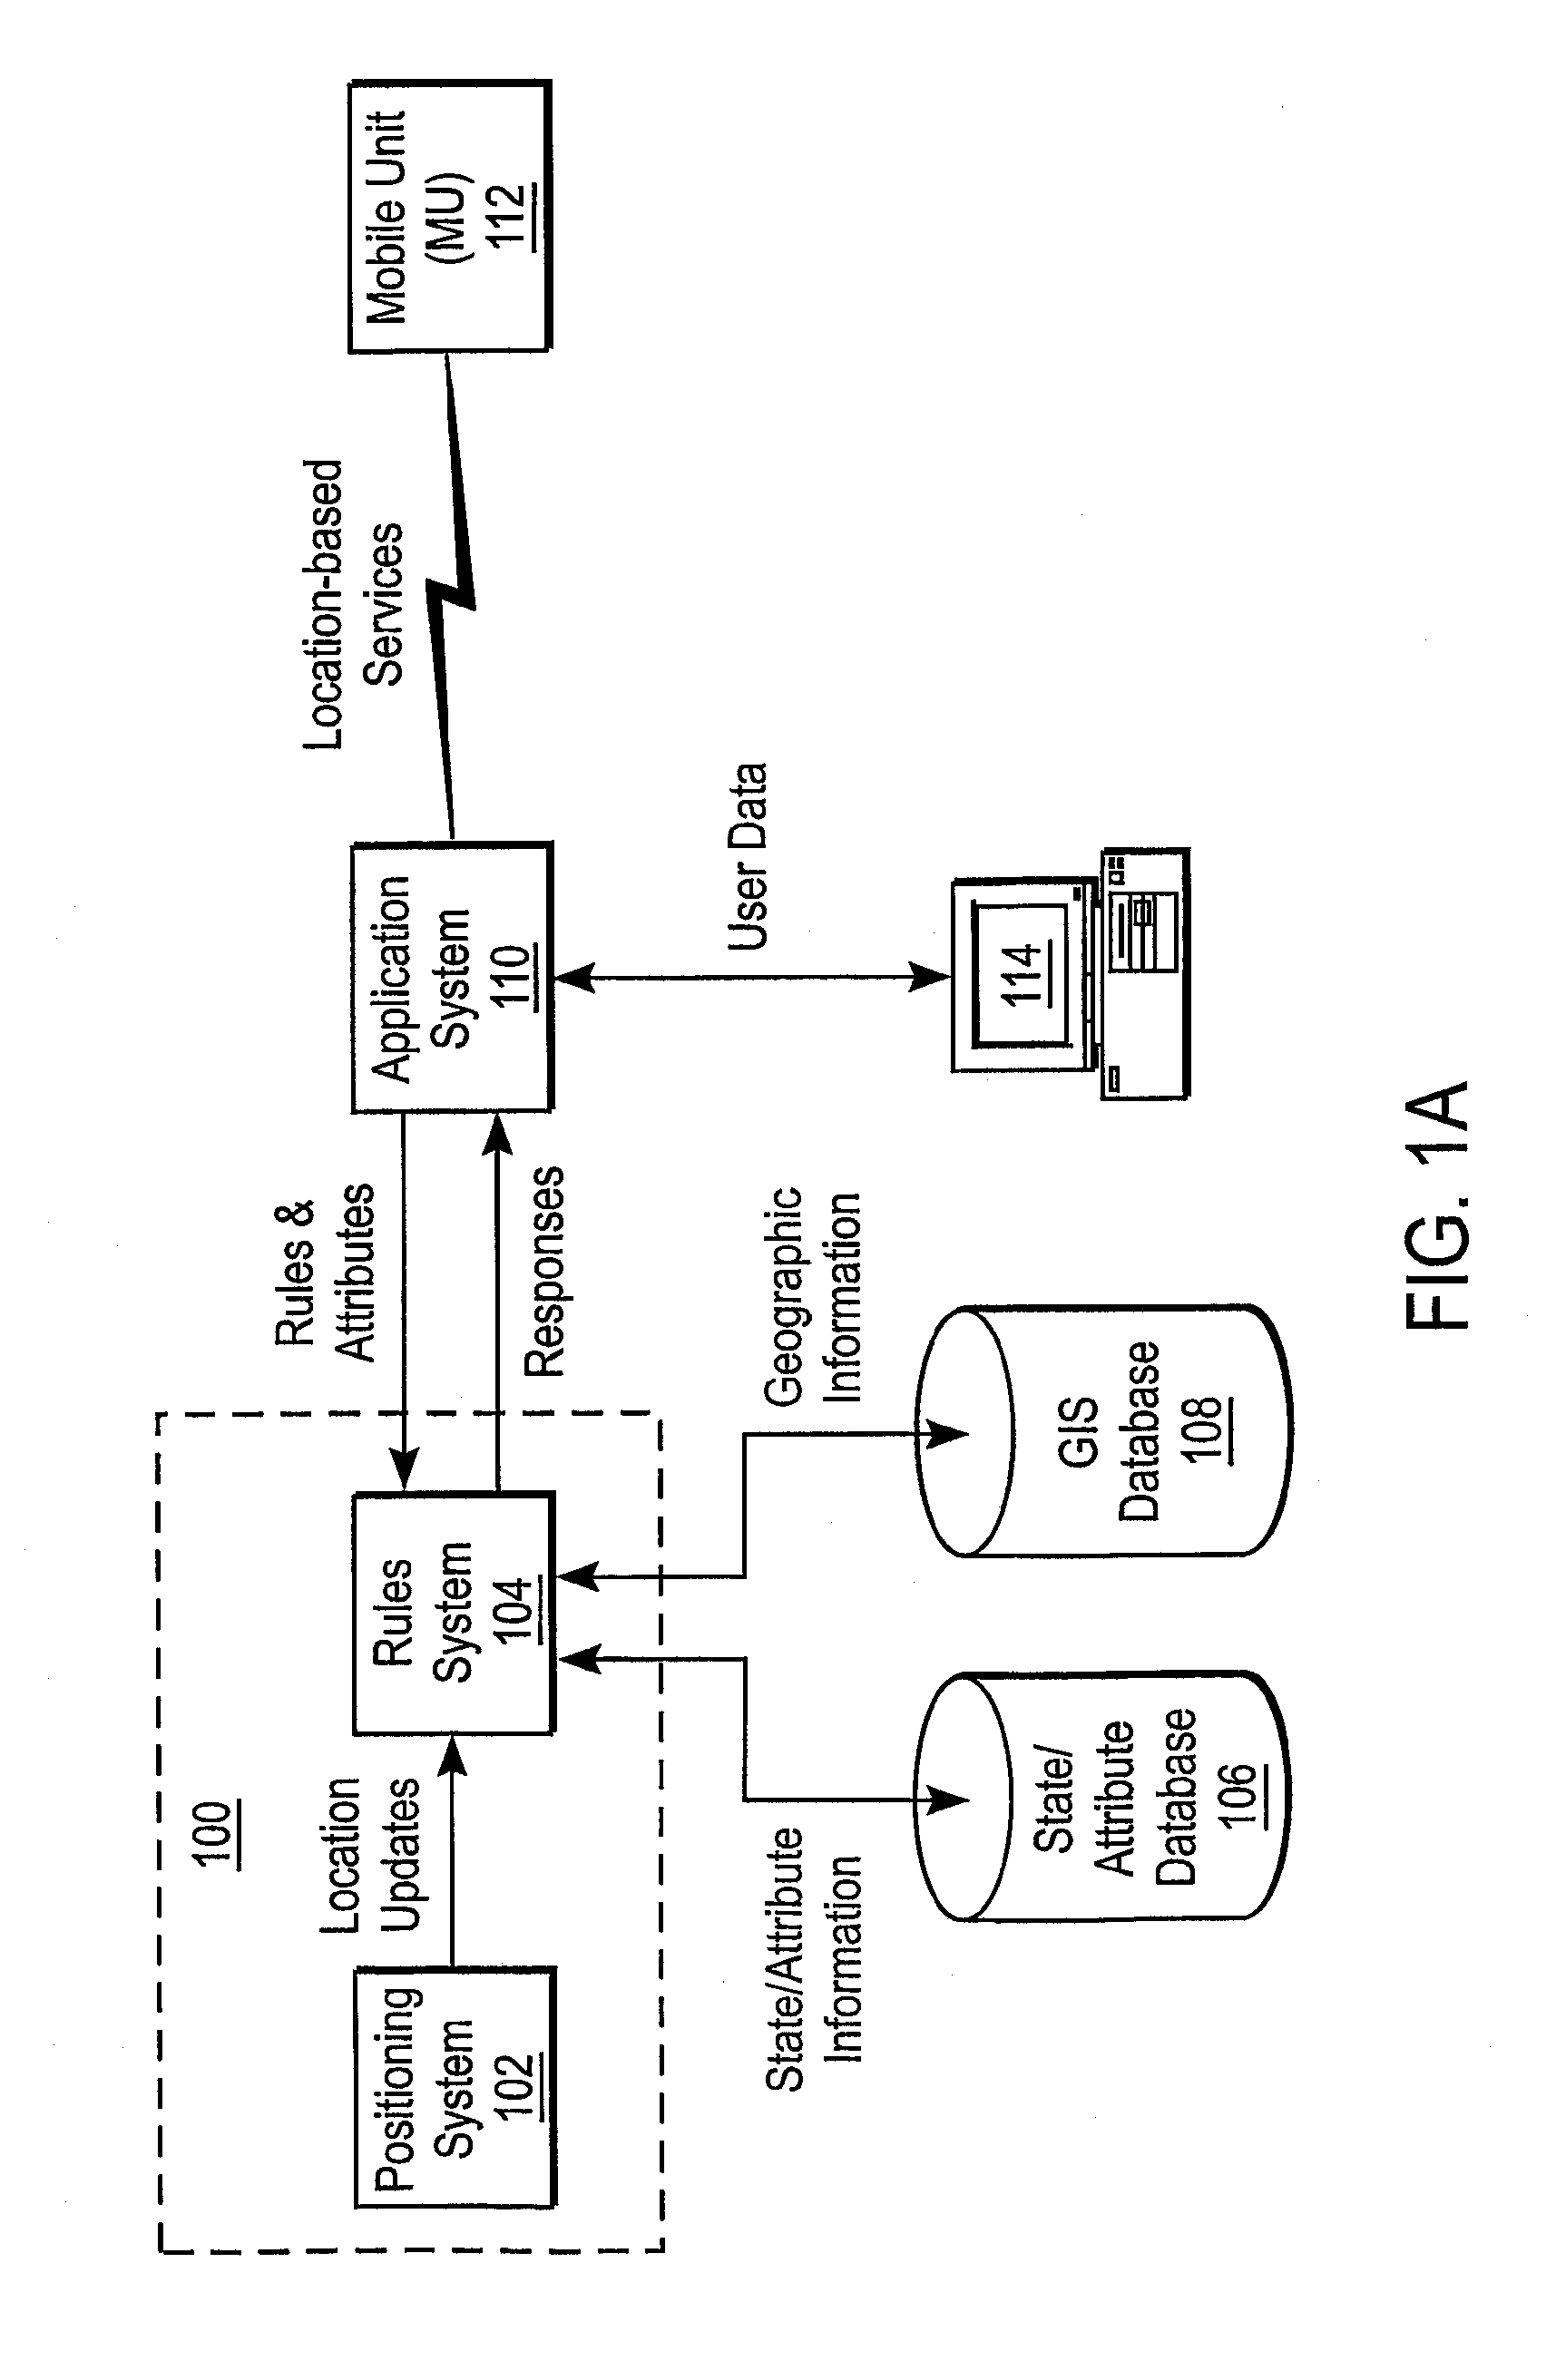 System and method for initiating responses to location-based events